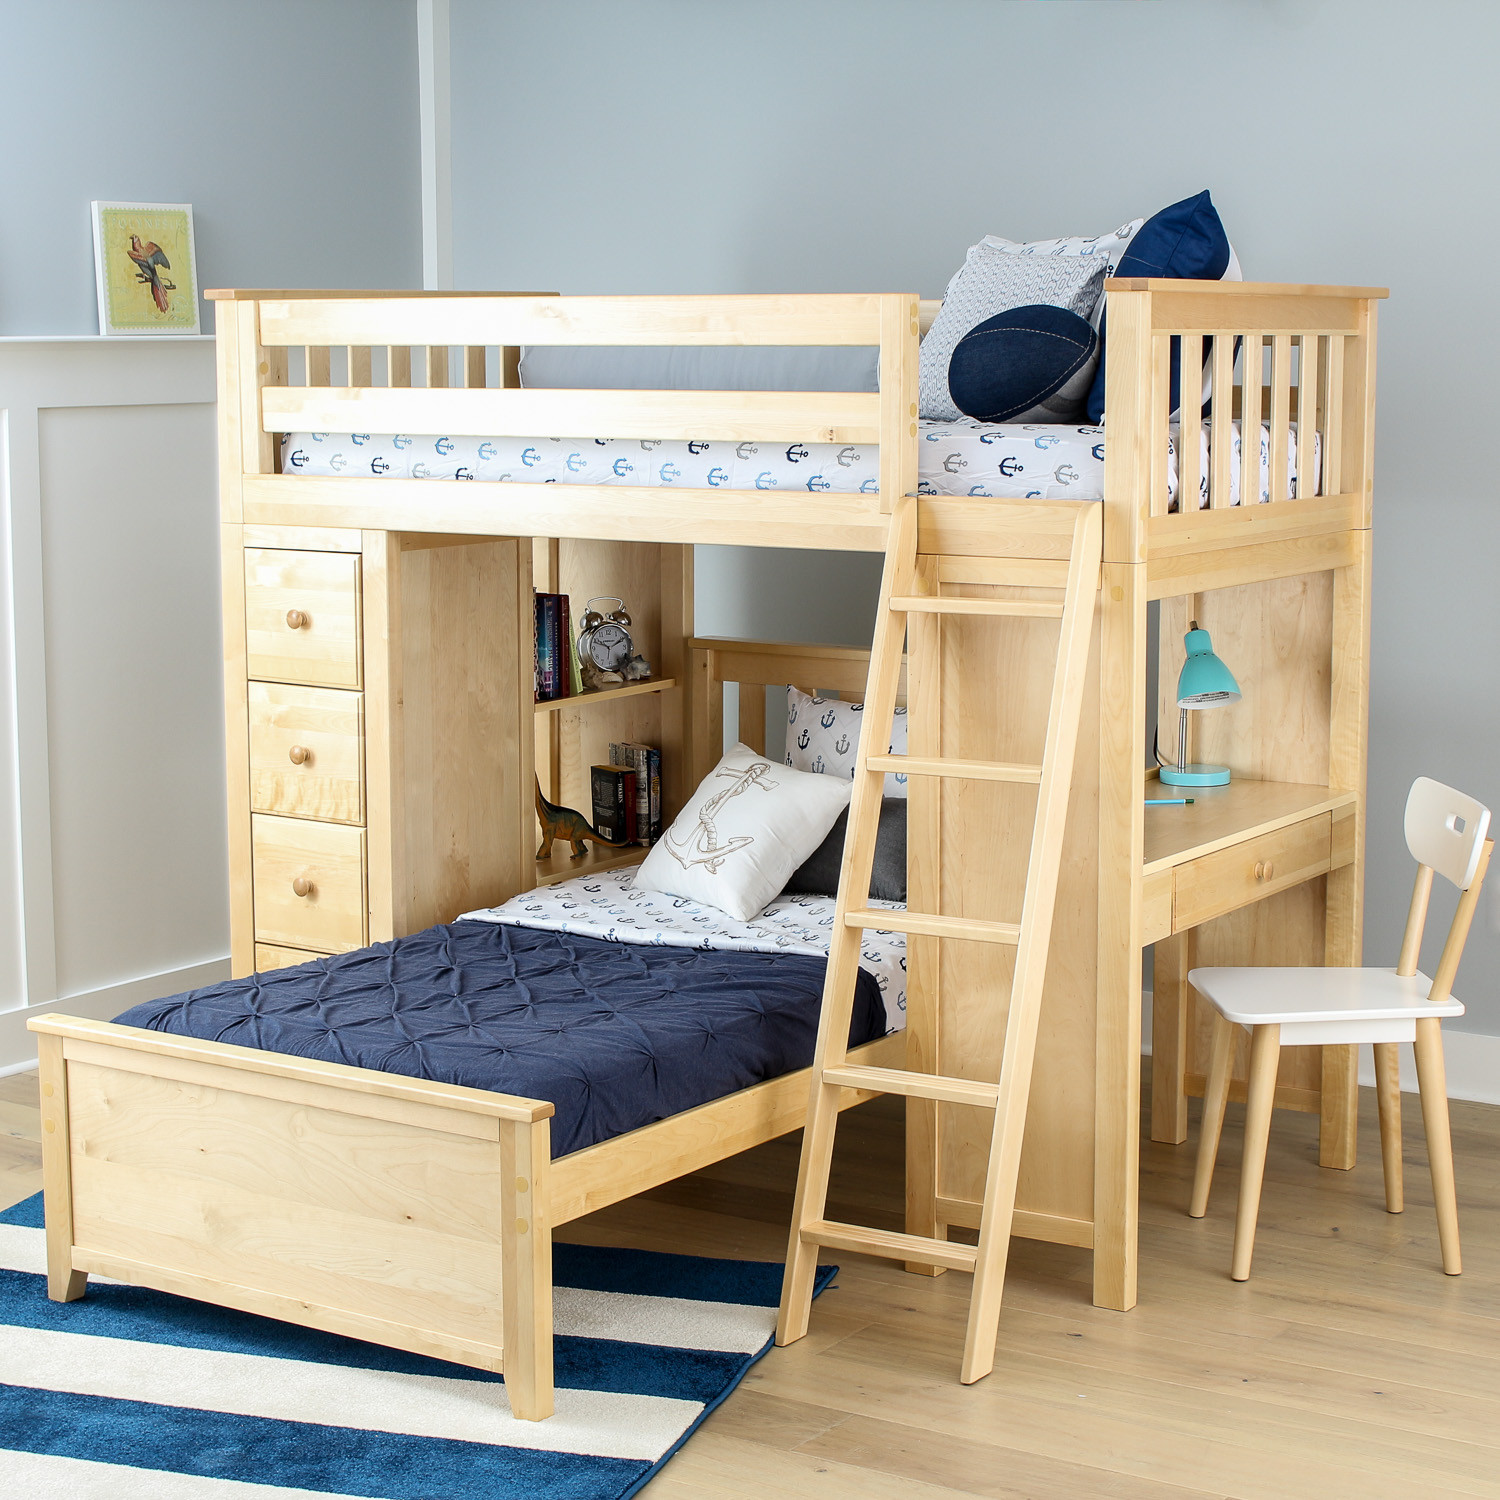 Kids Bunk Beds With Storage
 All in e Loft Bed Storage Study Twin Bed Natural